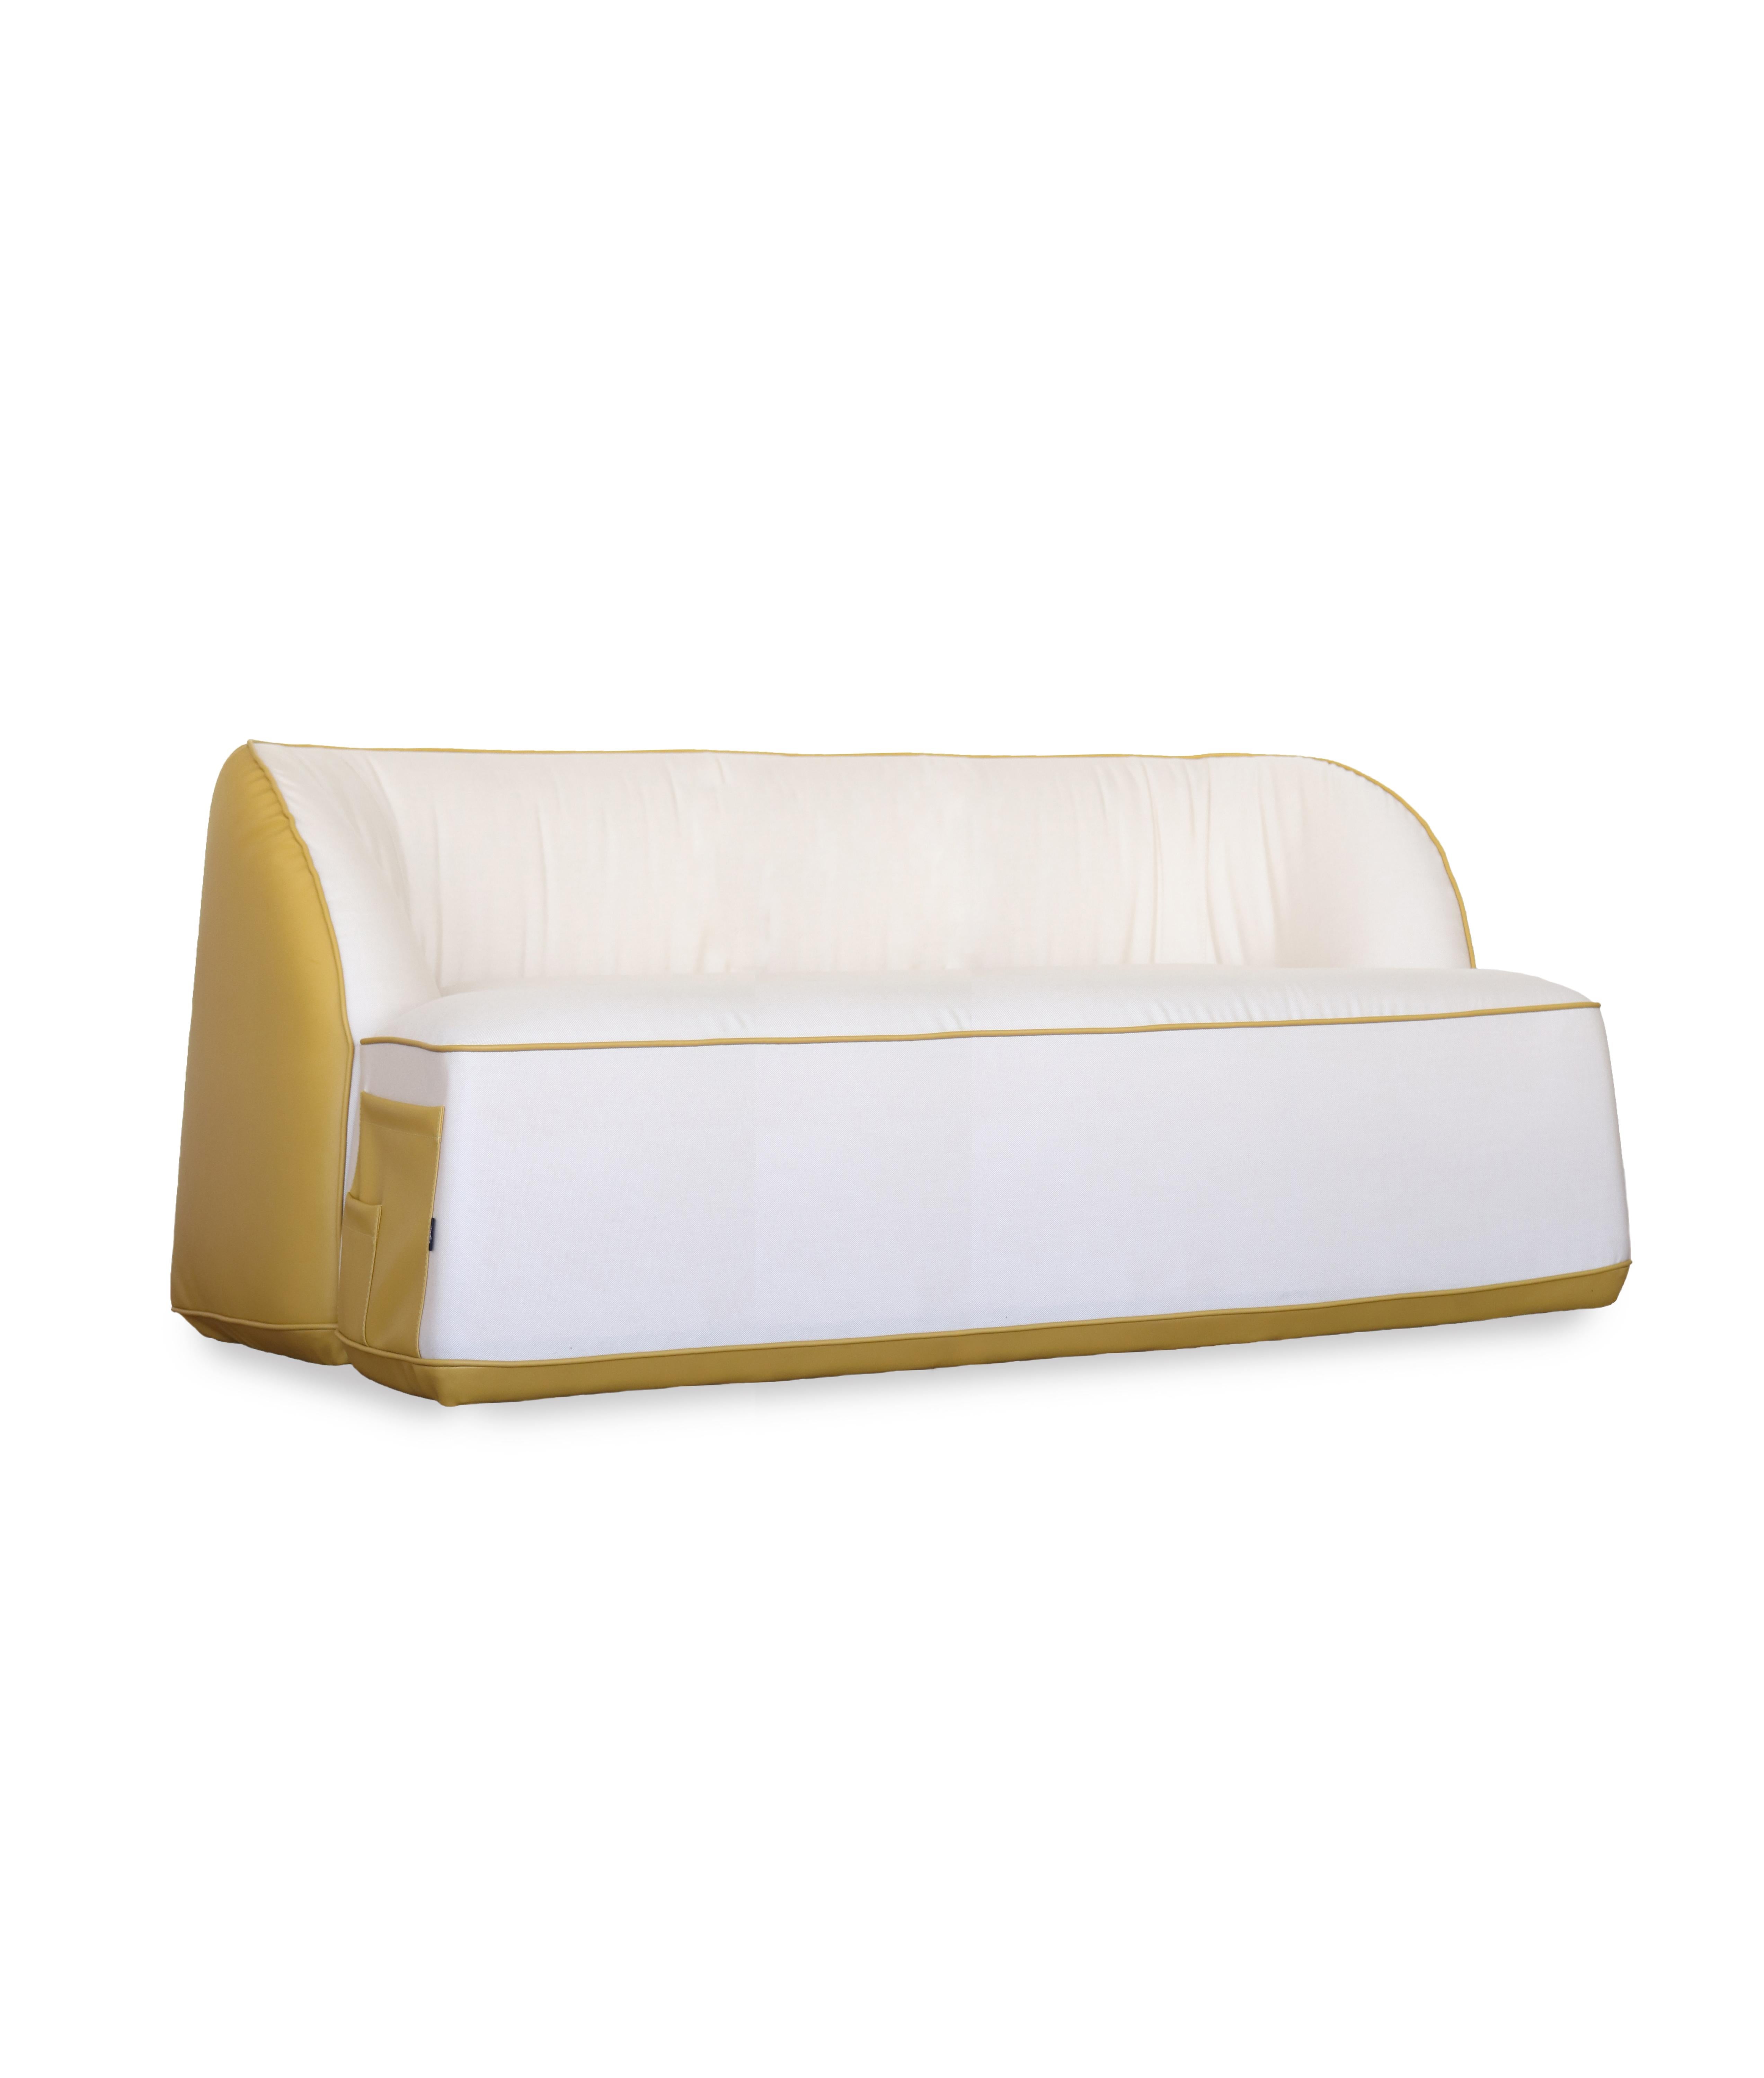 Flow Sunbed 

The Flow sunbed features a resistant base that provides stability and support, ensuring that you can fully sink into it. Its soft and cozy design creates a true cloud of comfort that will have you feeling relaxed and rejuvenated in no